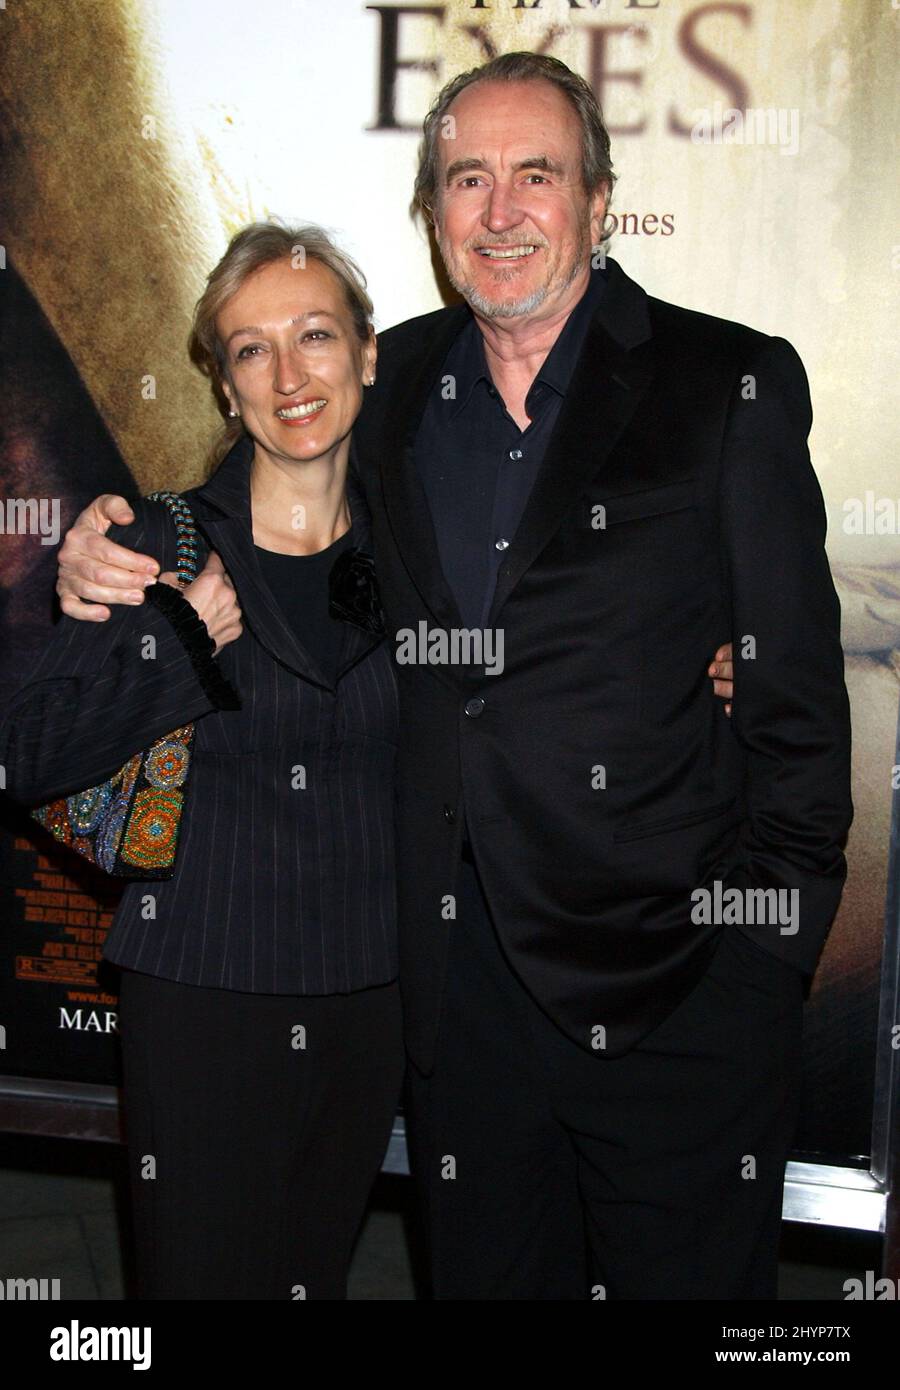 Wes Craven And Wife Iya Labunka Attend The Hills Have Eyes Premiere In